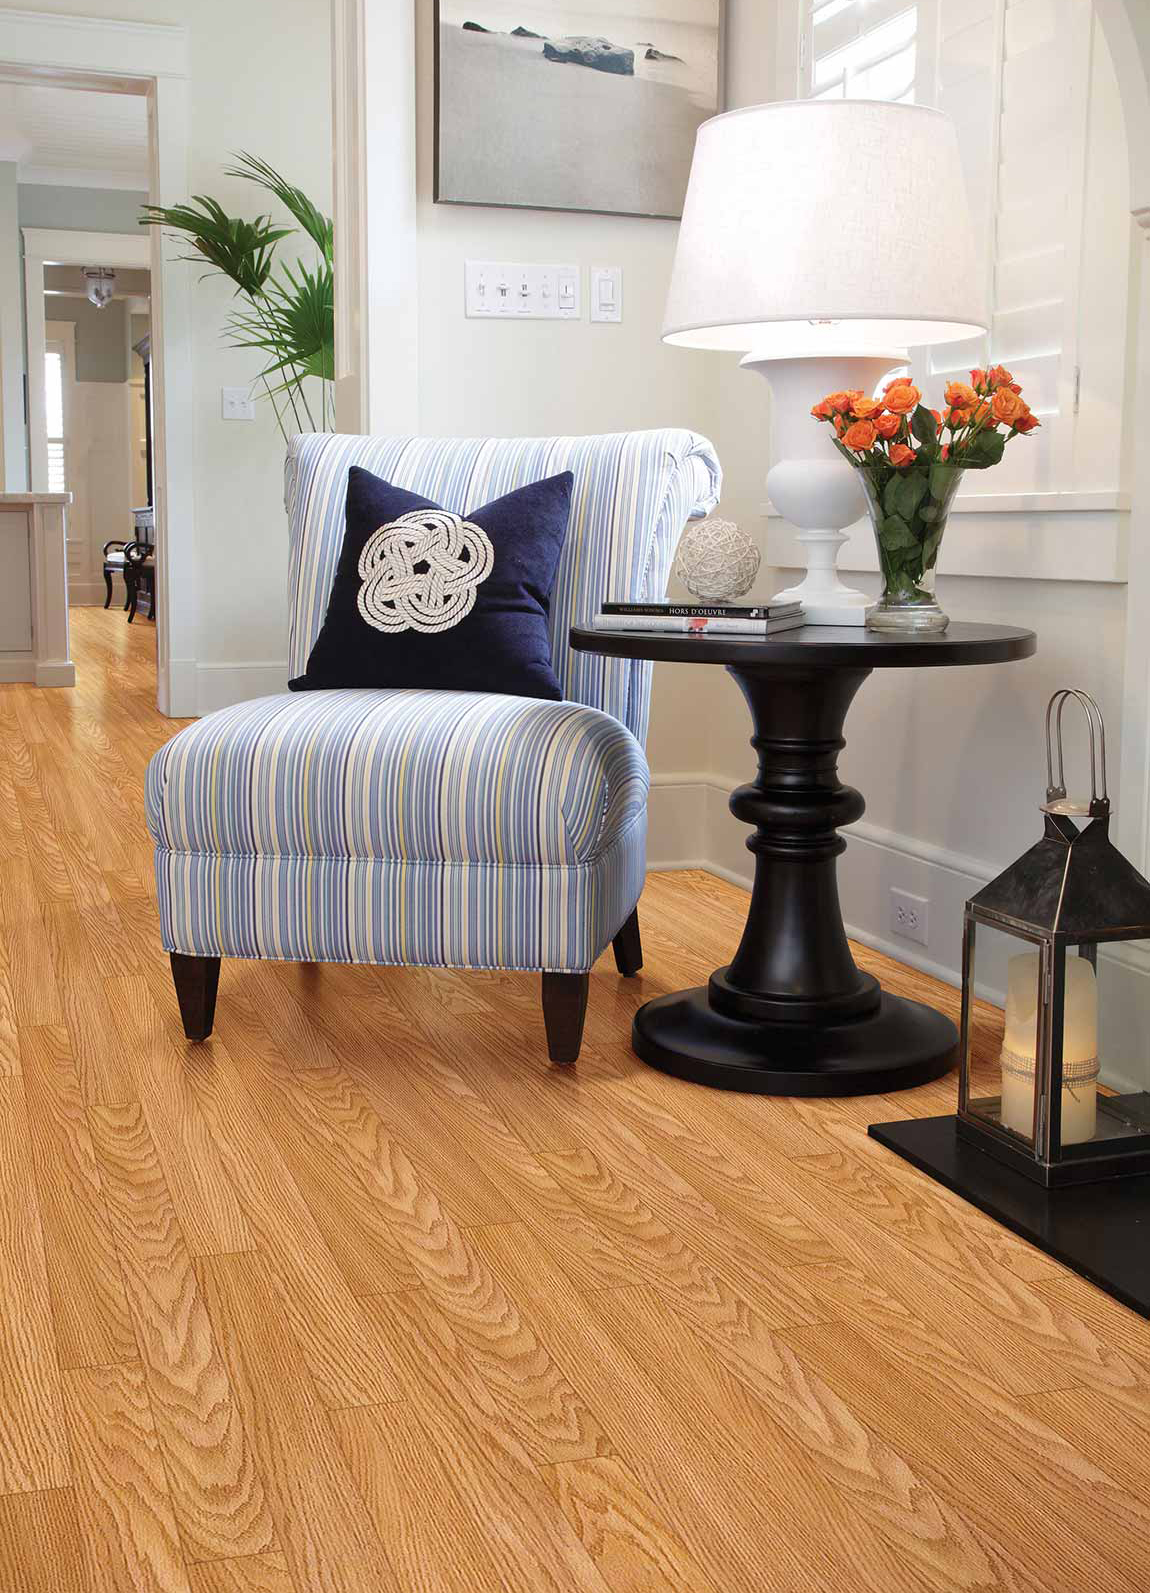 Laminate flooring by Shaw Floors. Wood-look laminate in hallway featuring end table, lamp, and blue armchair.